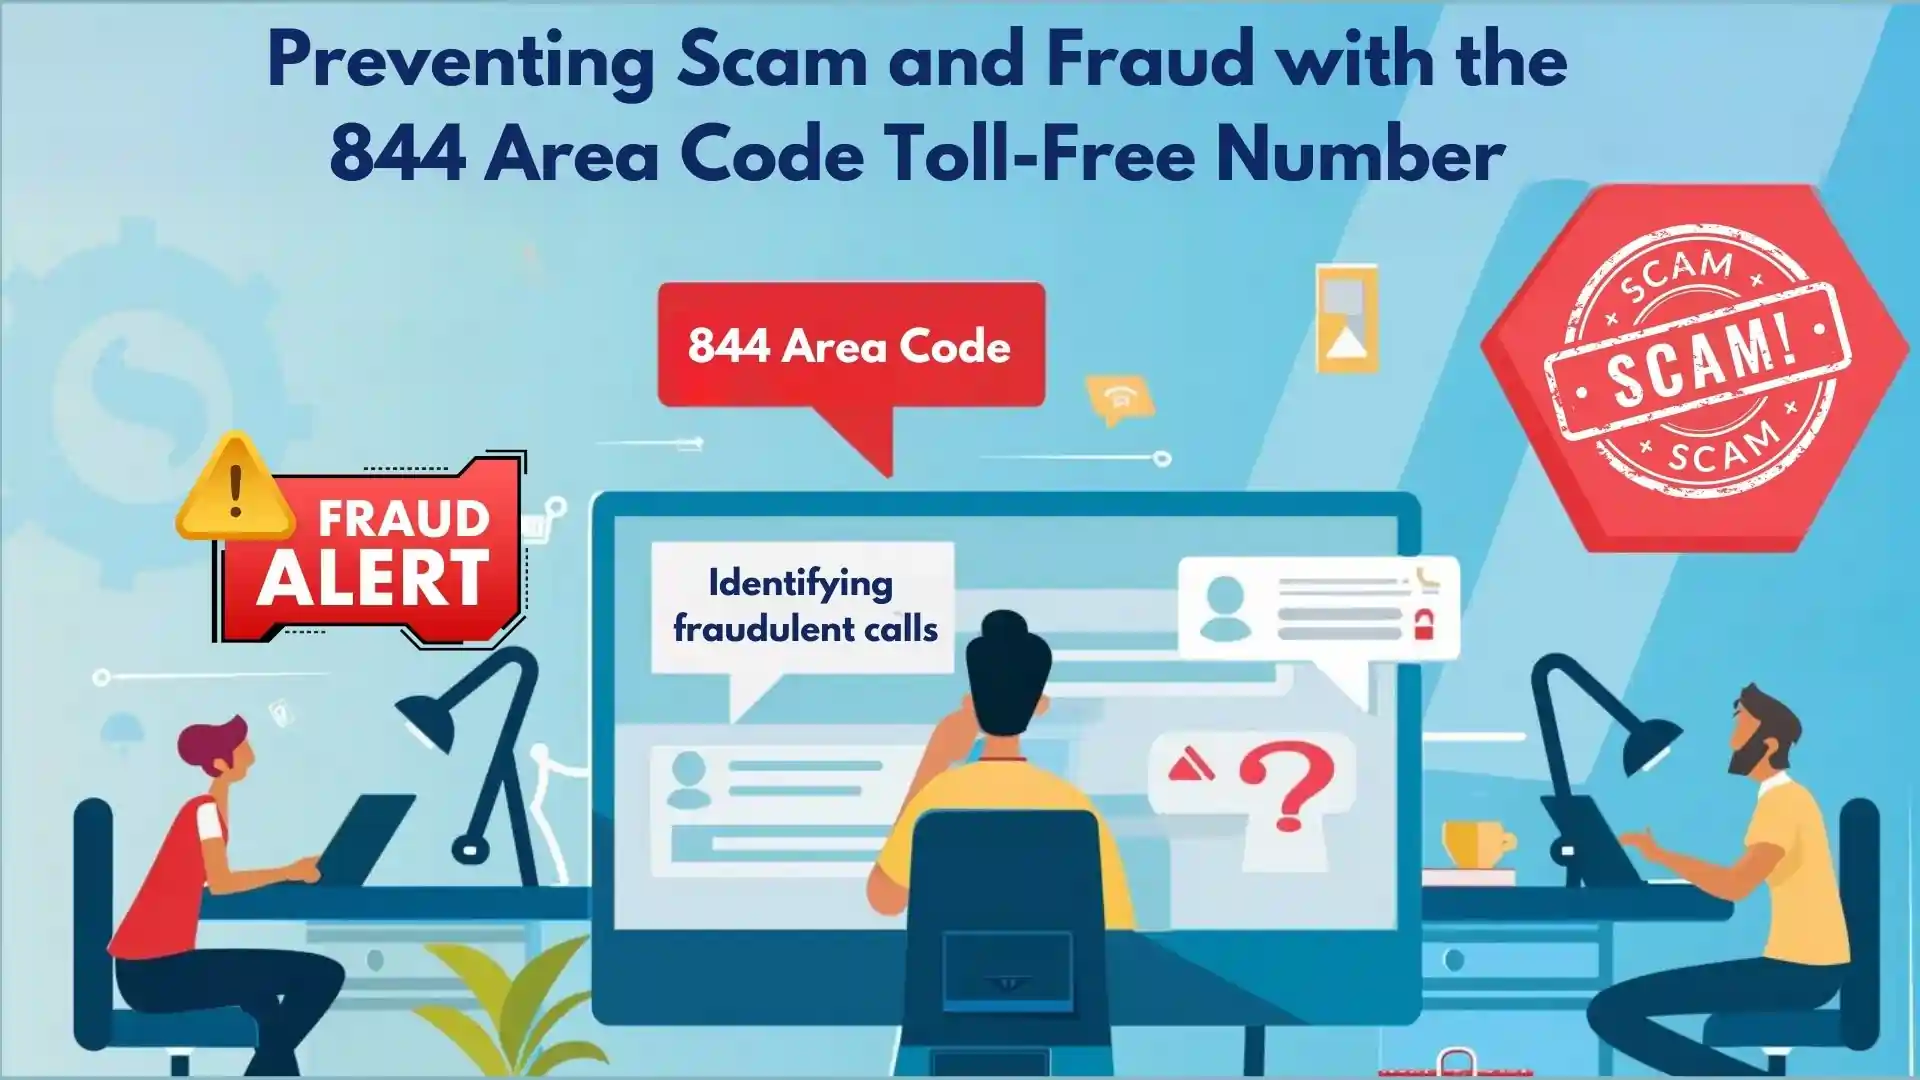 Preventing Scam and Fraud with the 844 Area Code Toll-Free Number